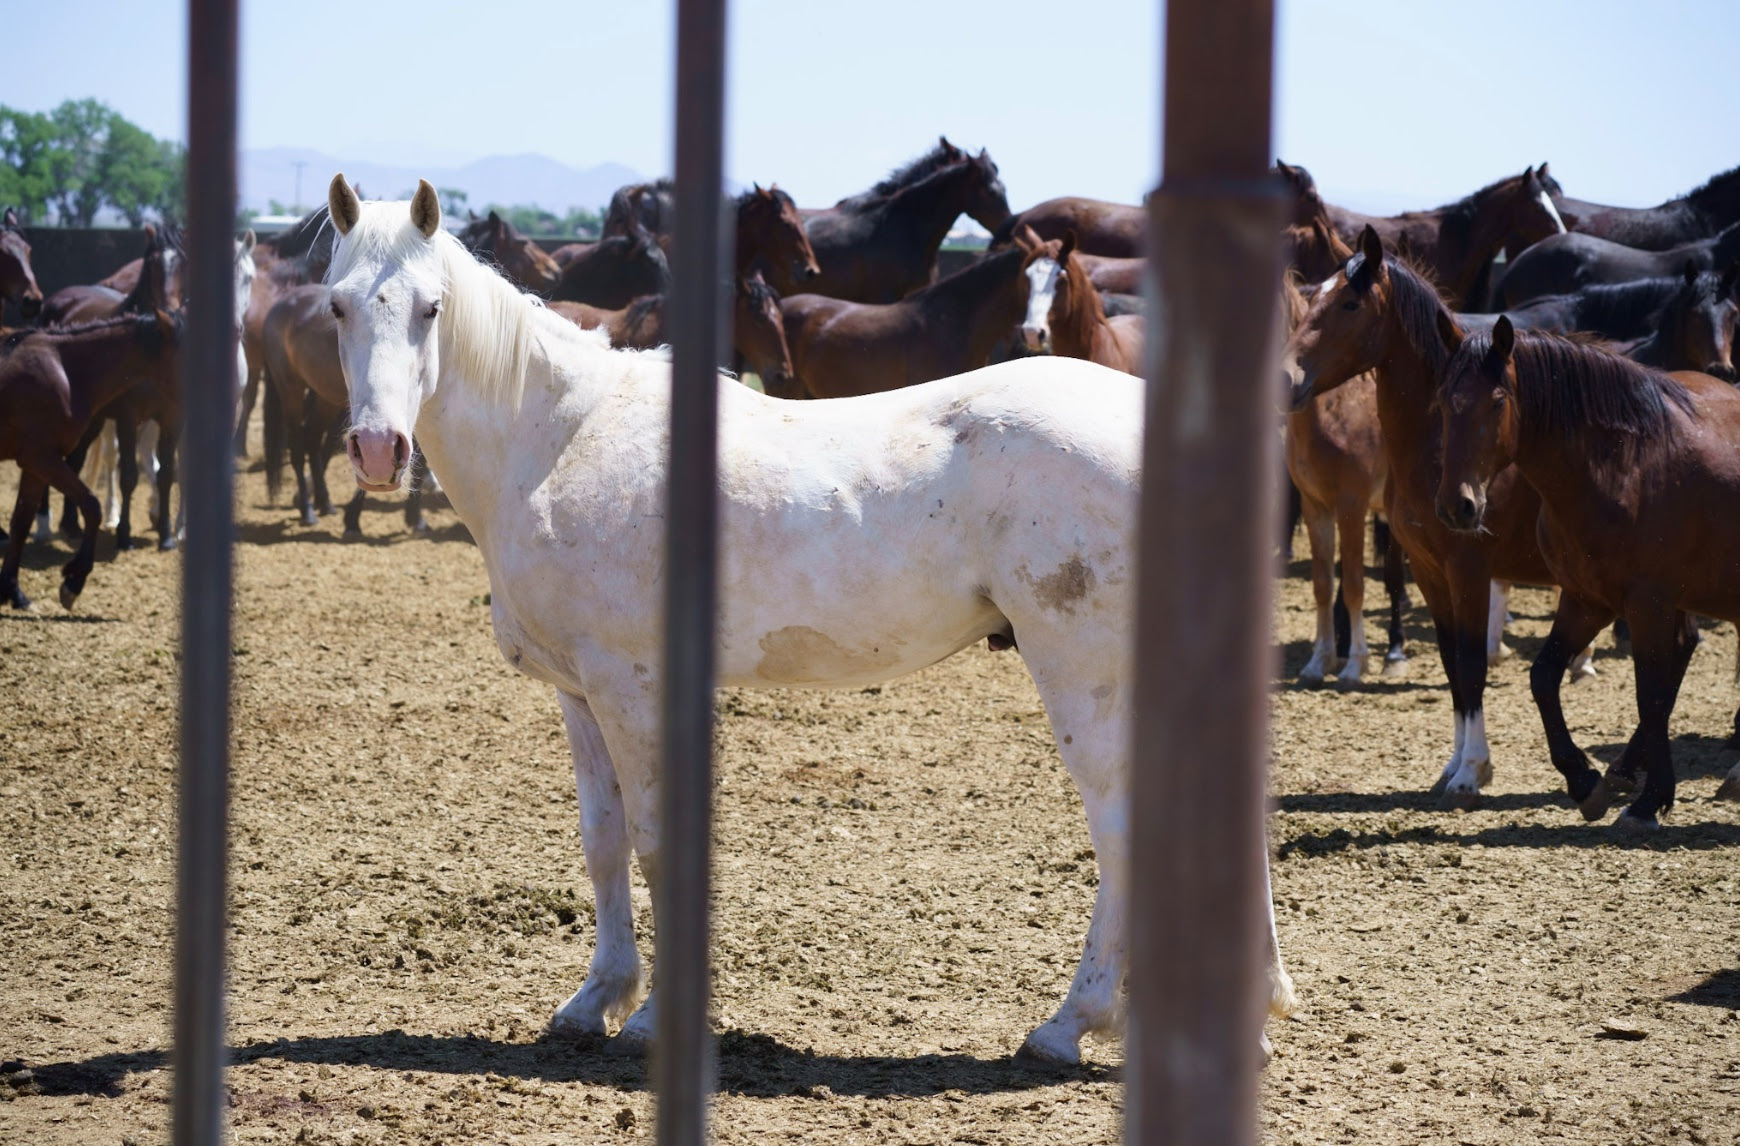 A white mustang stands behind the bars of a holding facility pen